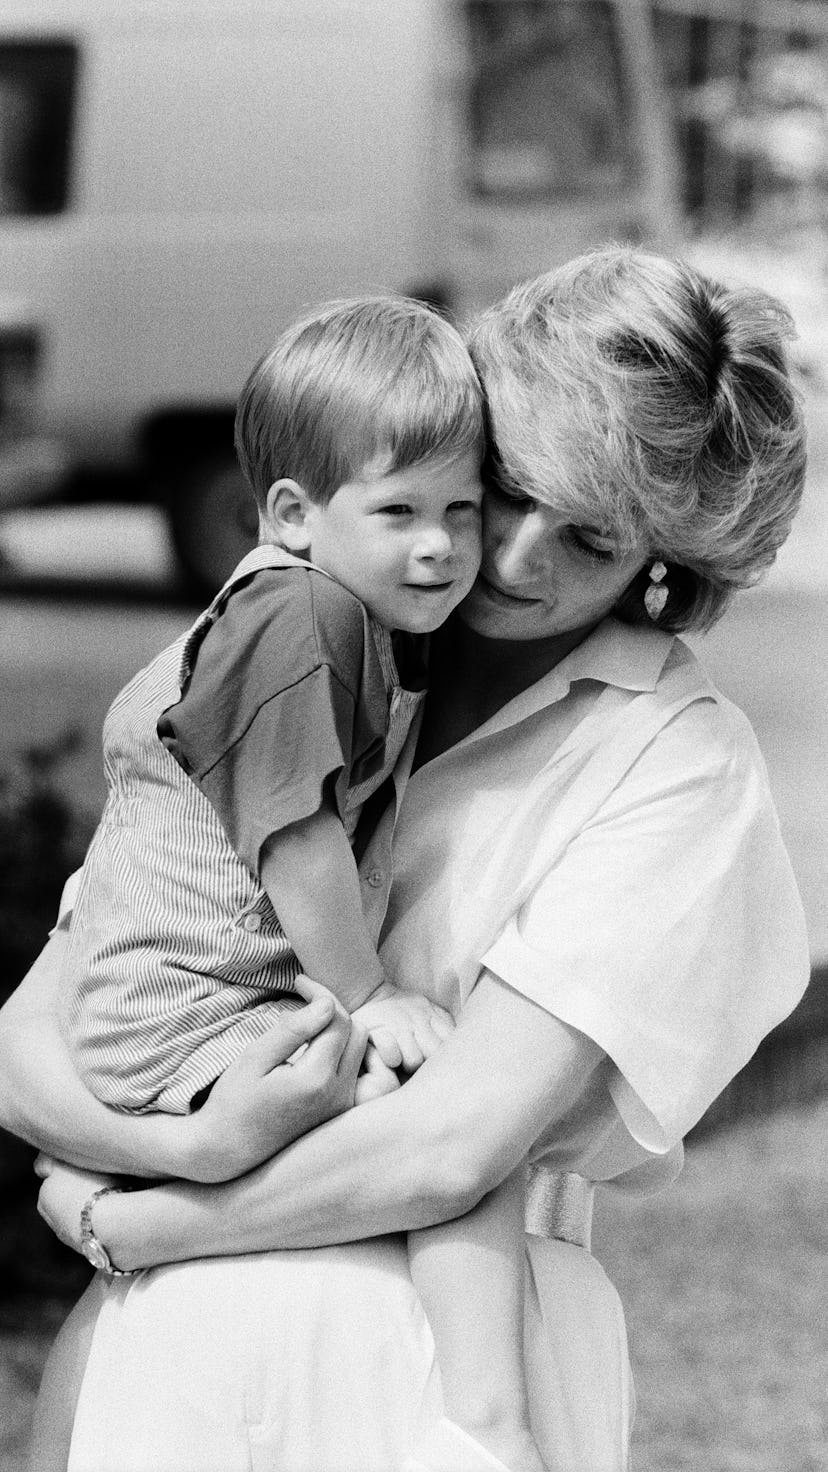 HRH Princess Diana, The Princess of Wales holds her young son Prince Harry on holiday in Majorca, Sp...